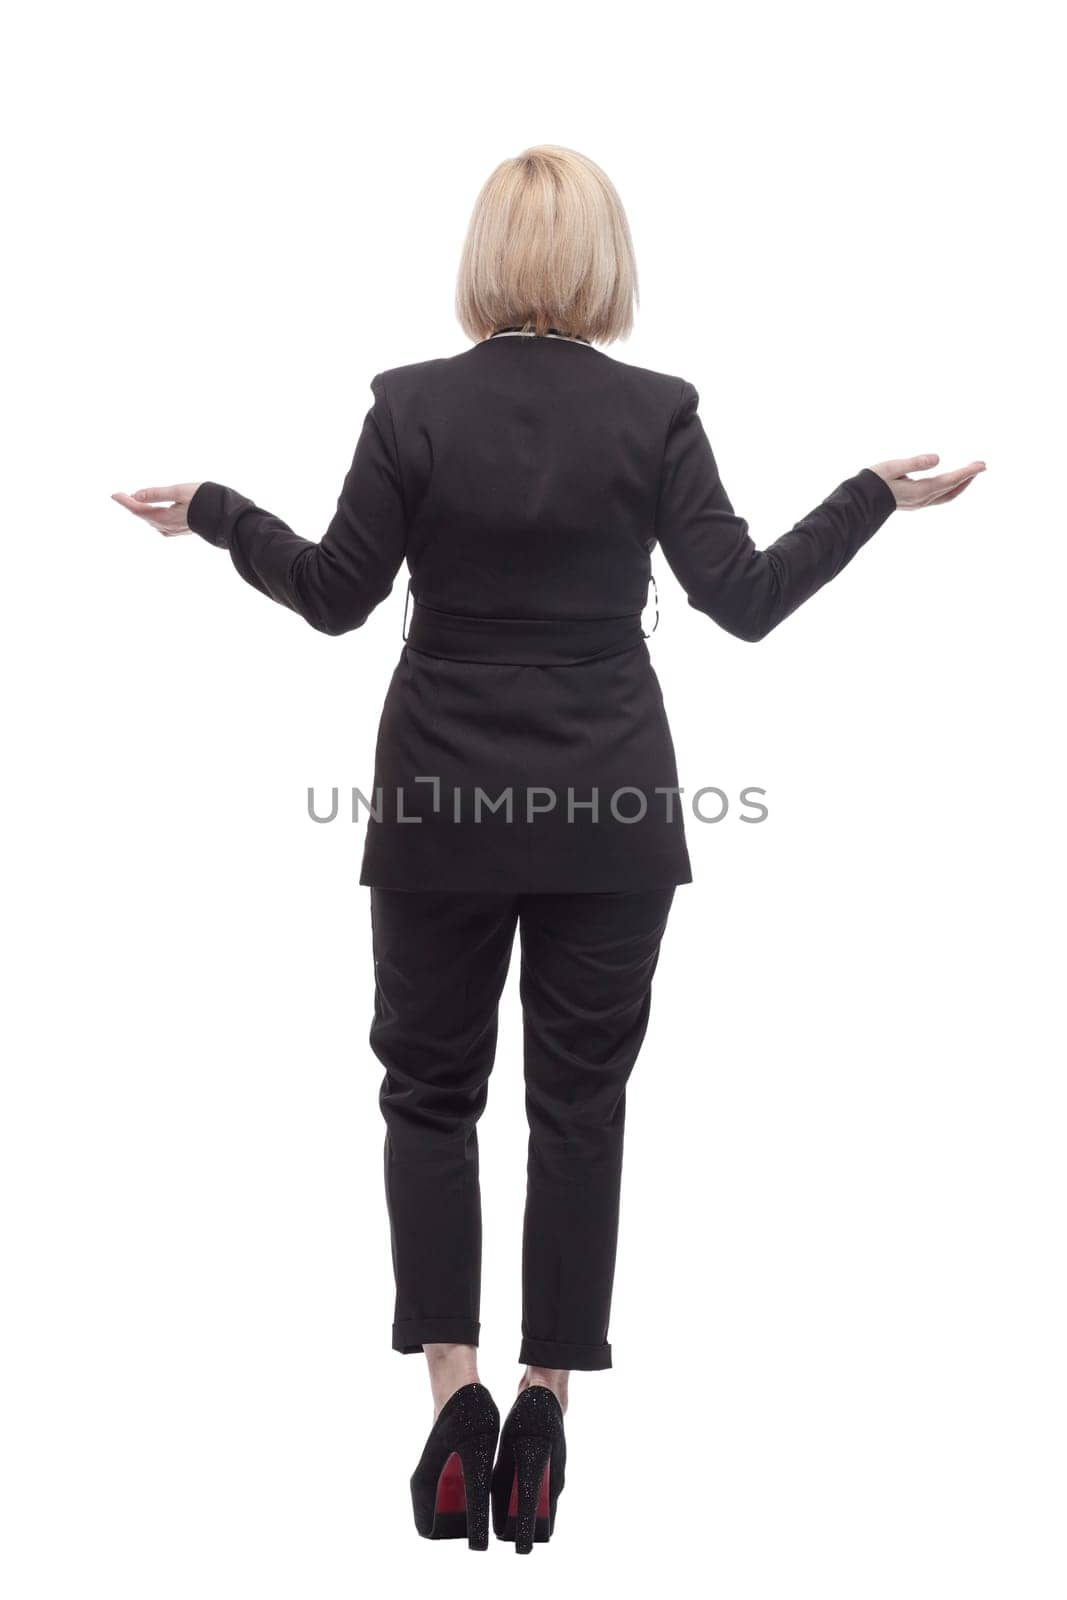 in full growth. confident business woman. isolated on a white background.